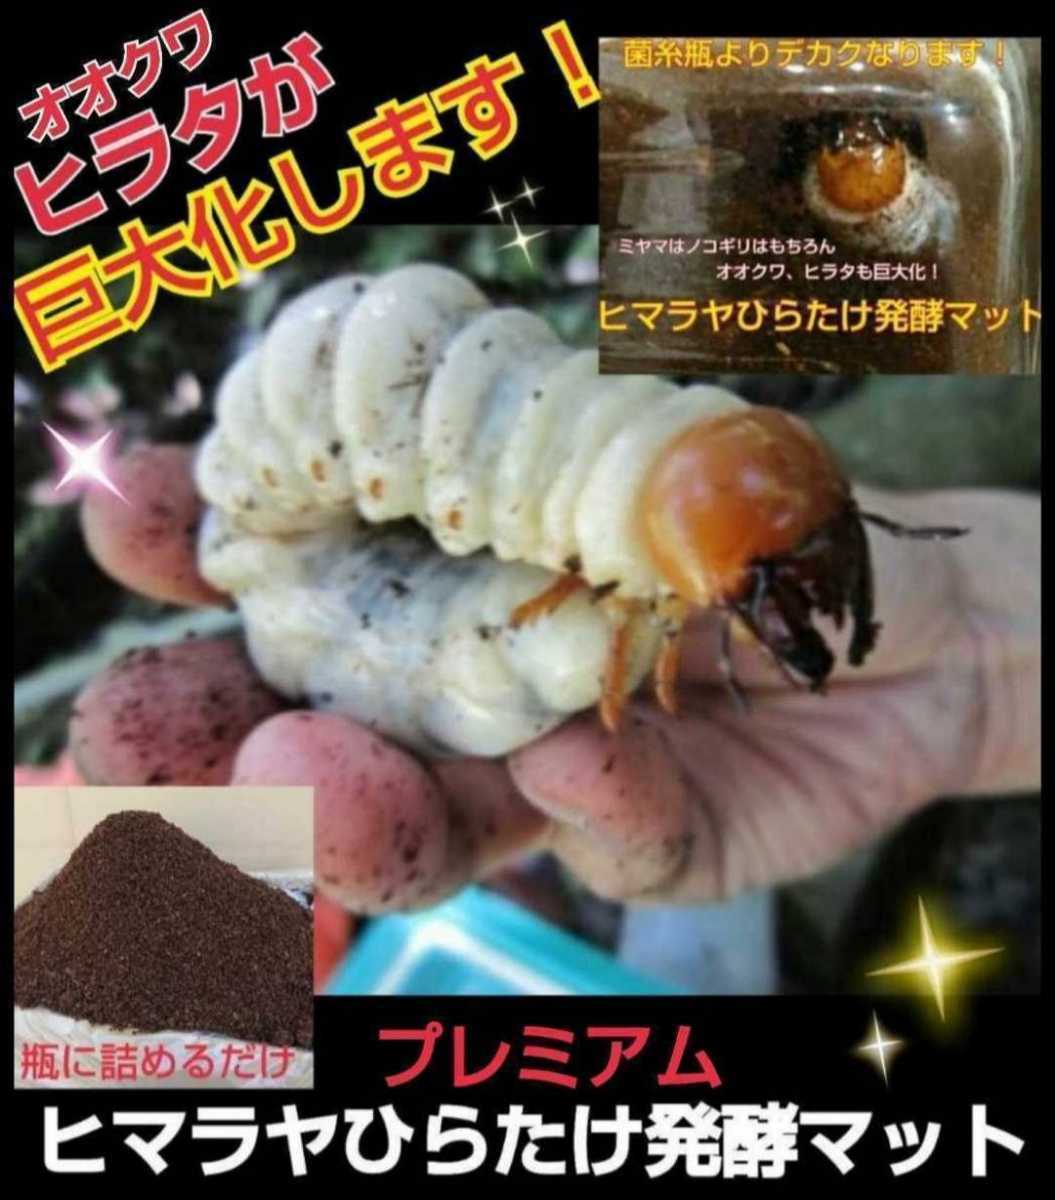  stag beetle larva. tenth .. direct after! pudding cup entering premium 3 next departure . stag beetle mat [40 set ] the smallest particle . good meal ..!tore Hello s combination 